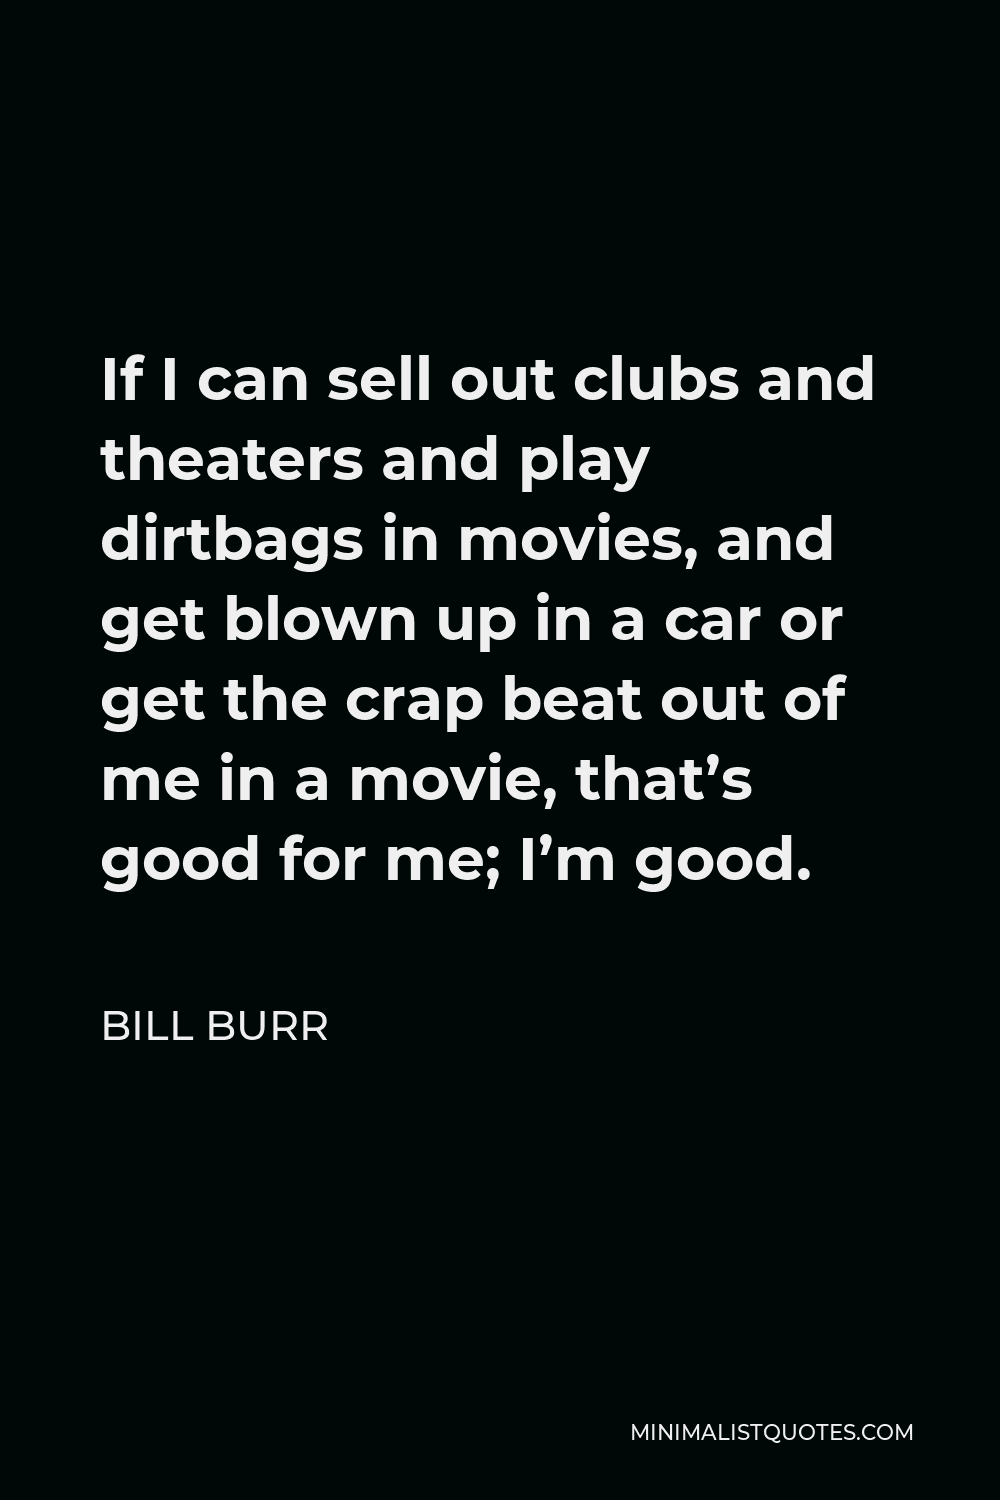 Bill Burr Quote - If I can sell out clubs and theaters and play dirtbags in movies, and get blown up in a car or get the crap beat out of me in a movie, that’s good for me; I’m good.